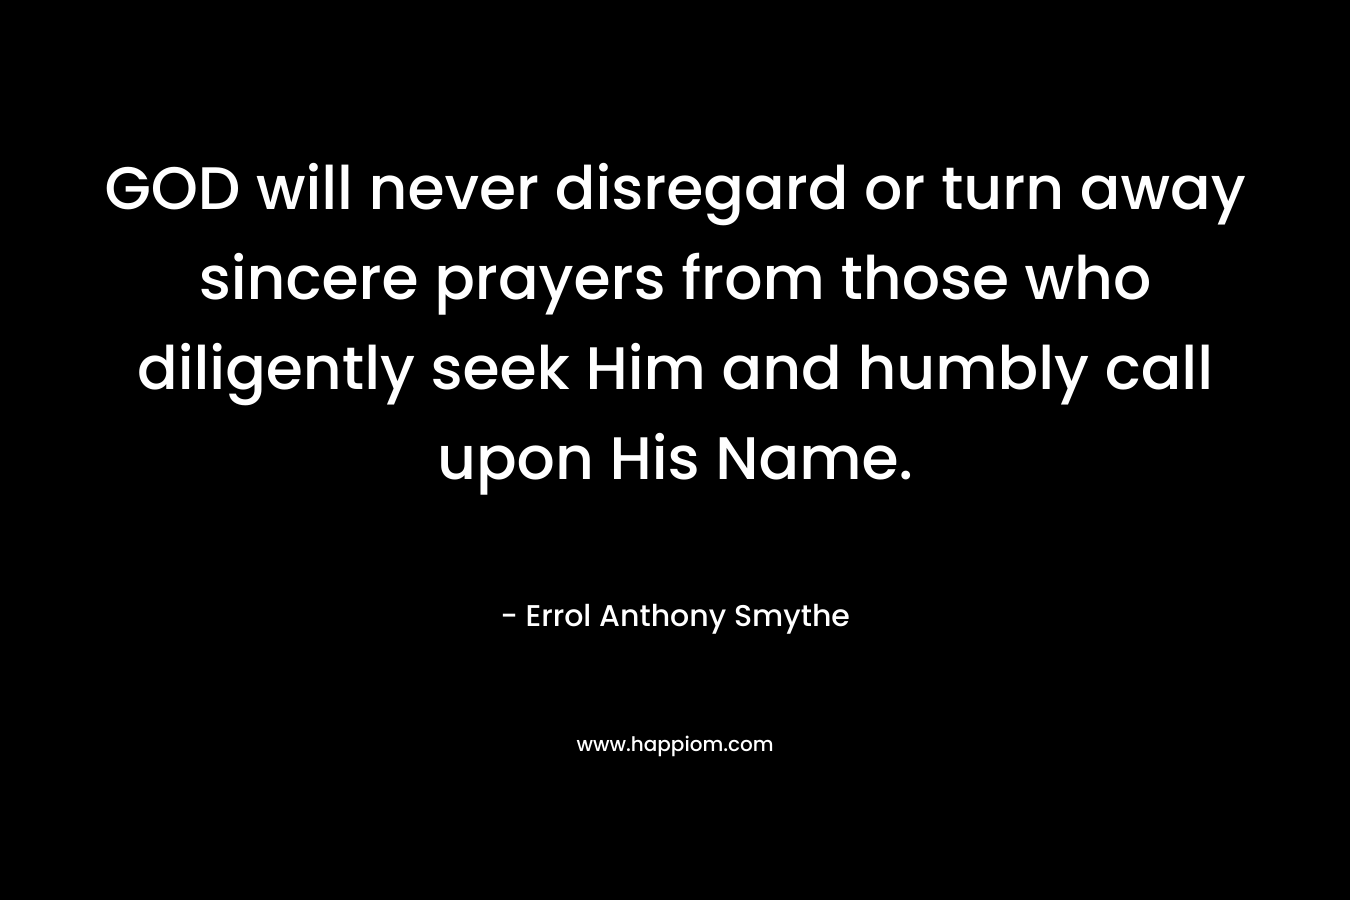 GOD will never disregard or turn away sincere prayers from those who diligently seek Him and humbly call upon His Name. – Errol Anthony Smythe